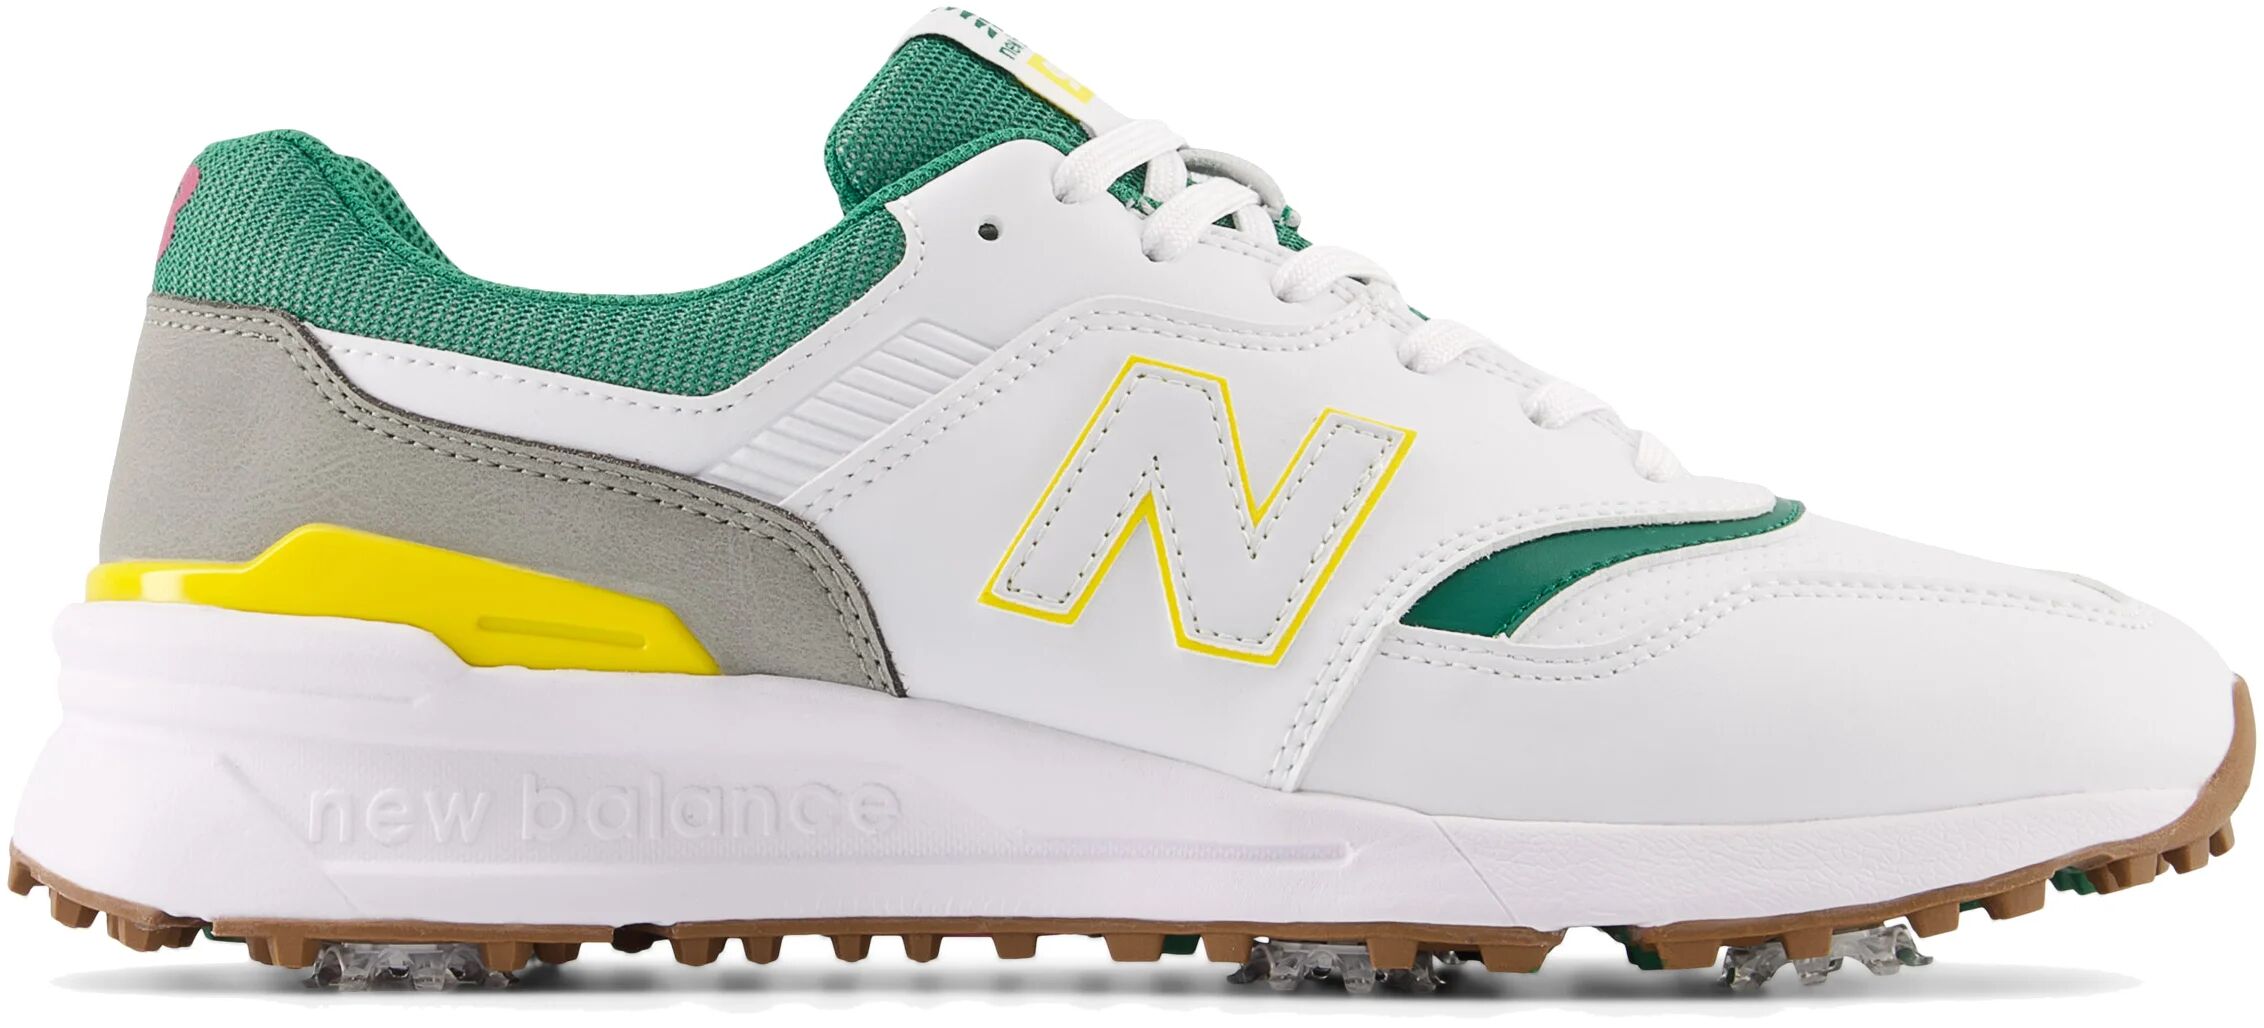 New Balance Limited Edition 997 Golf Shoes - White/Multi - 11.5 - D